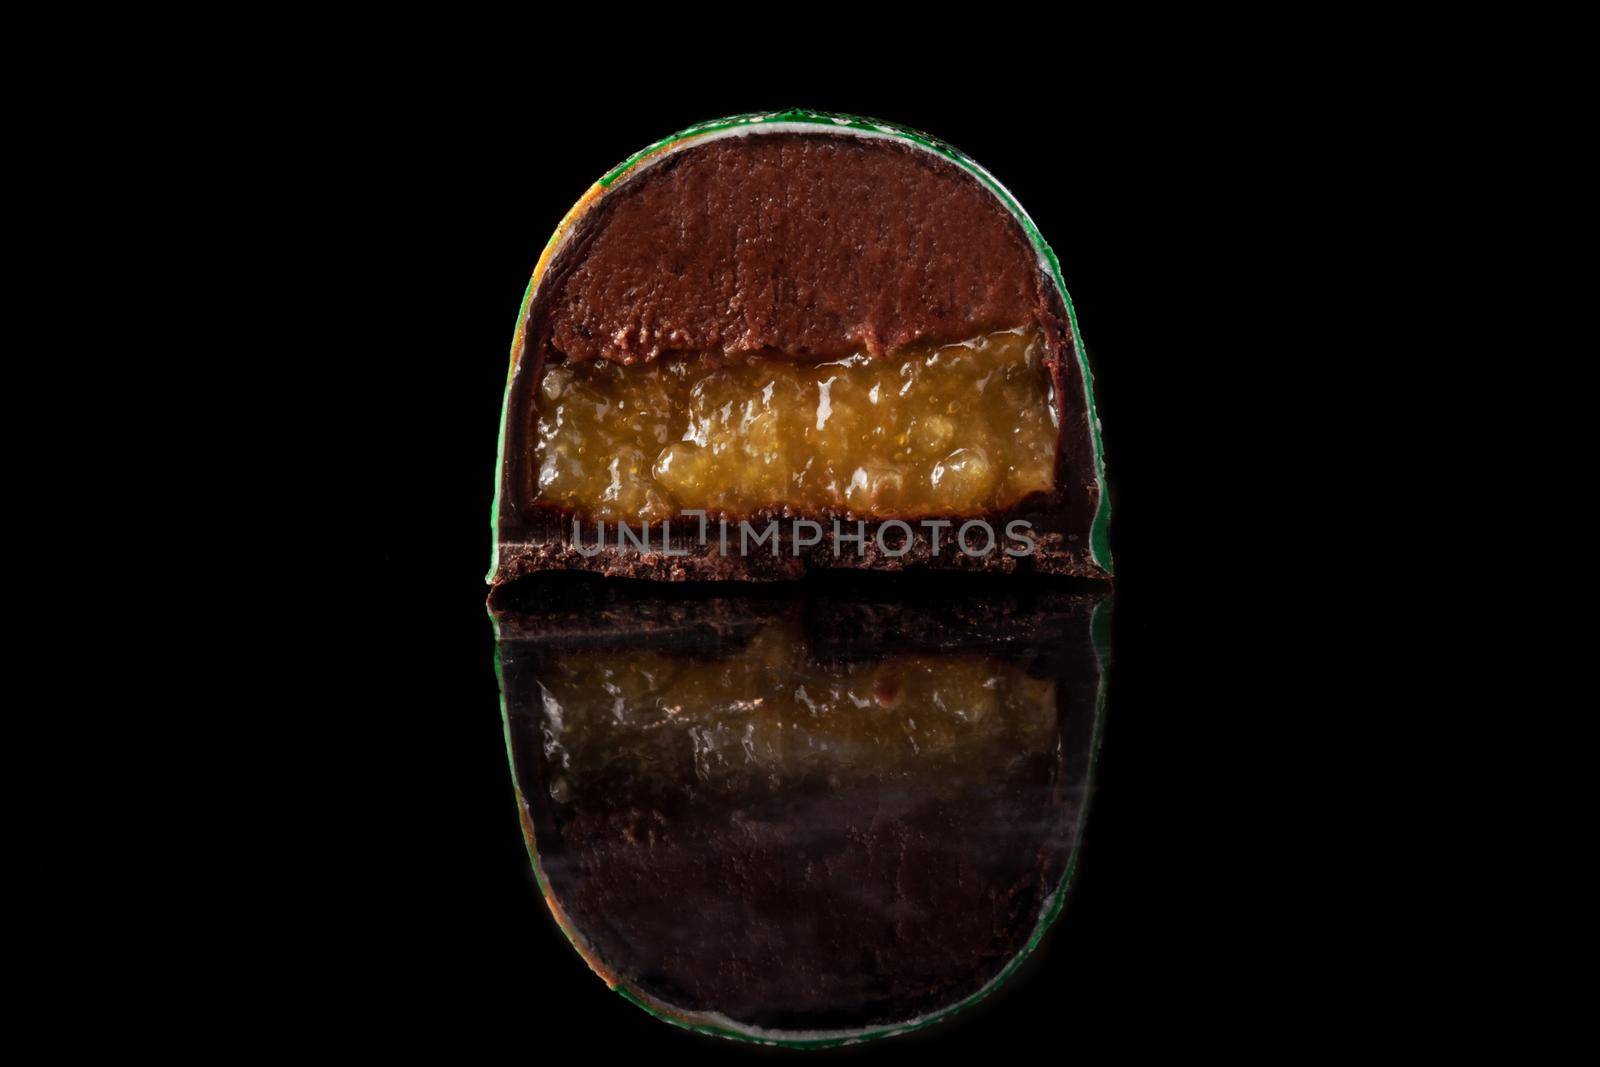 Cut luxury handmade candy with chocolate and yellow confiture filling on black background. by nazarovsergey